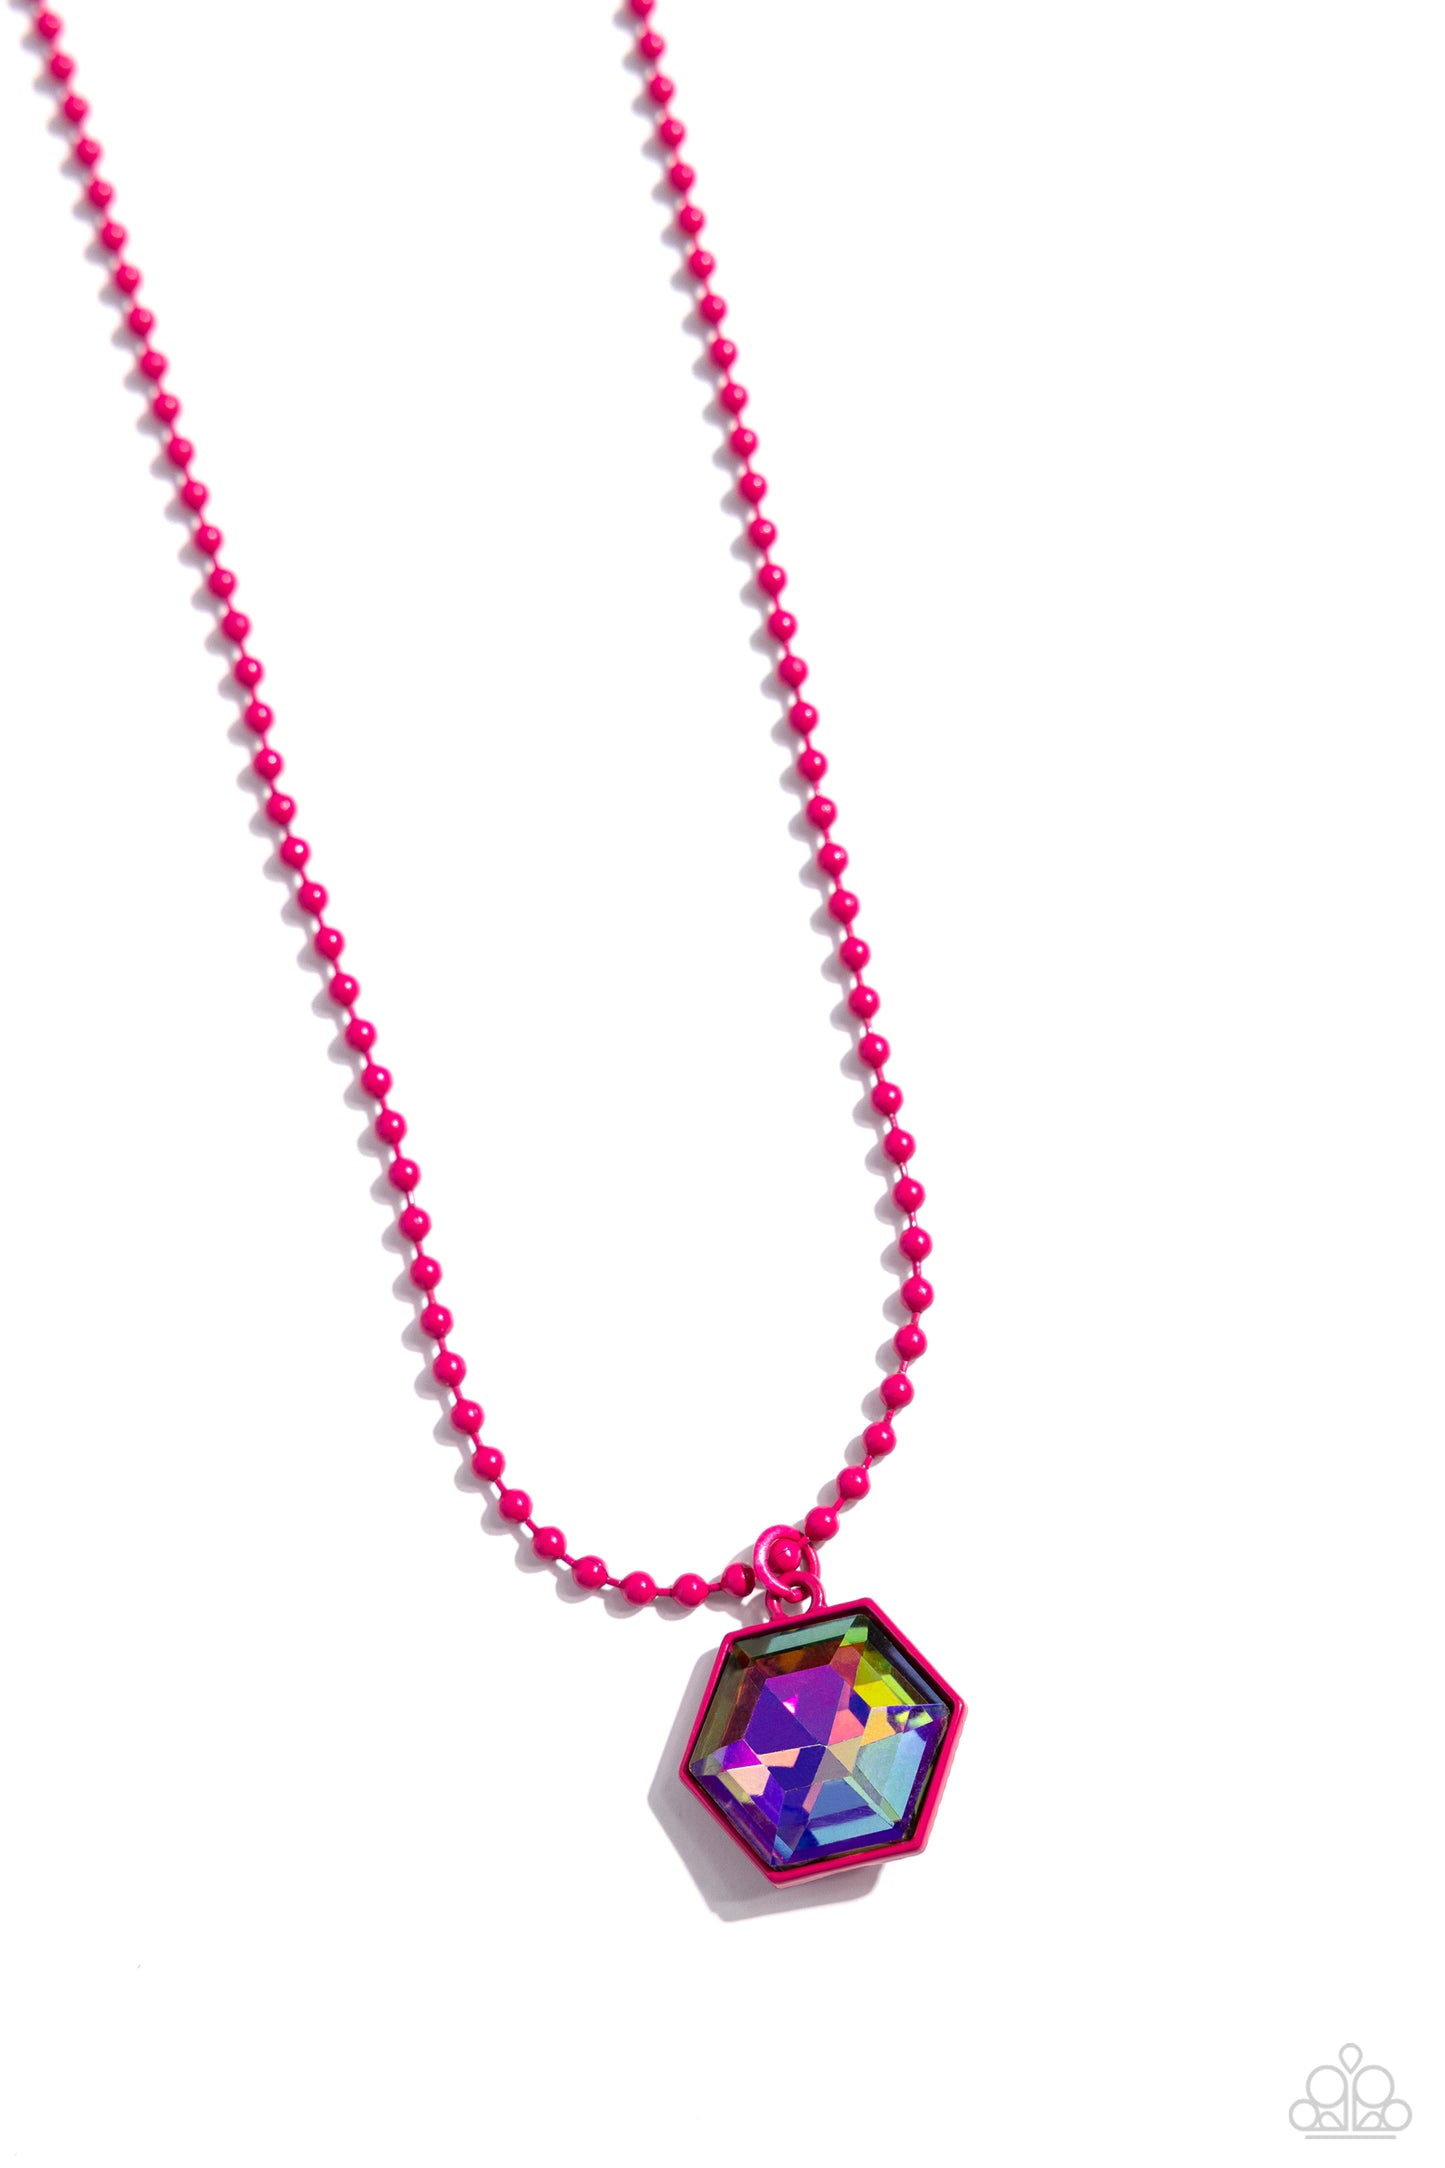 Sprinkle of Simplicity - Pink Ball Chain/Multicolored Gem Pendant Paparazzi Necklace & matching earrings